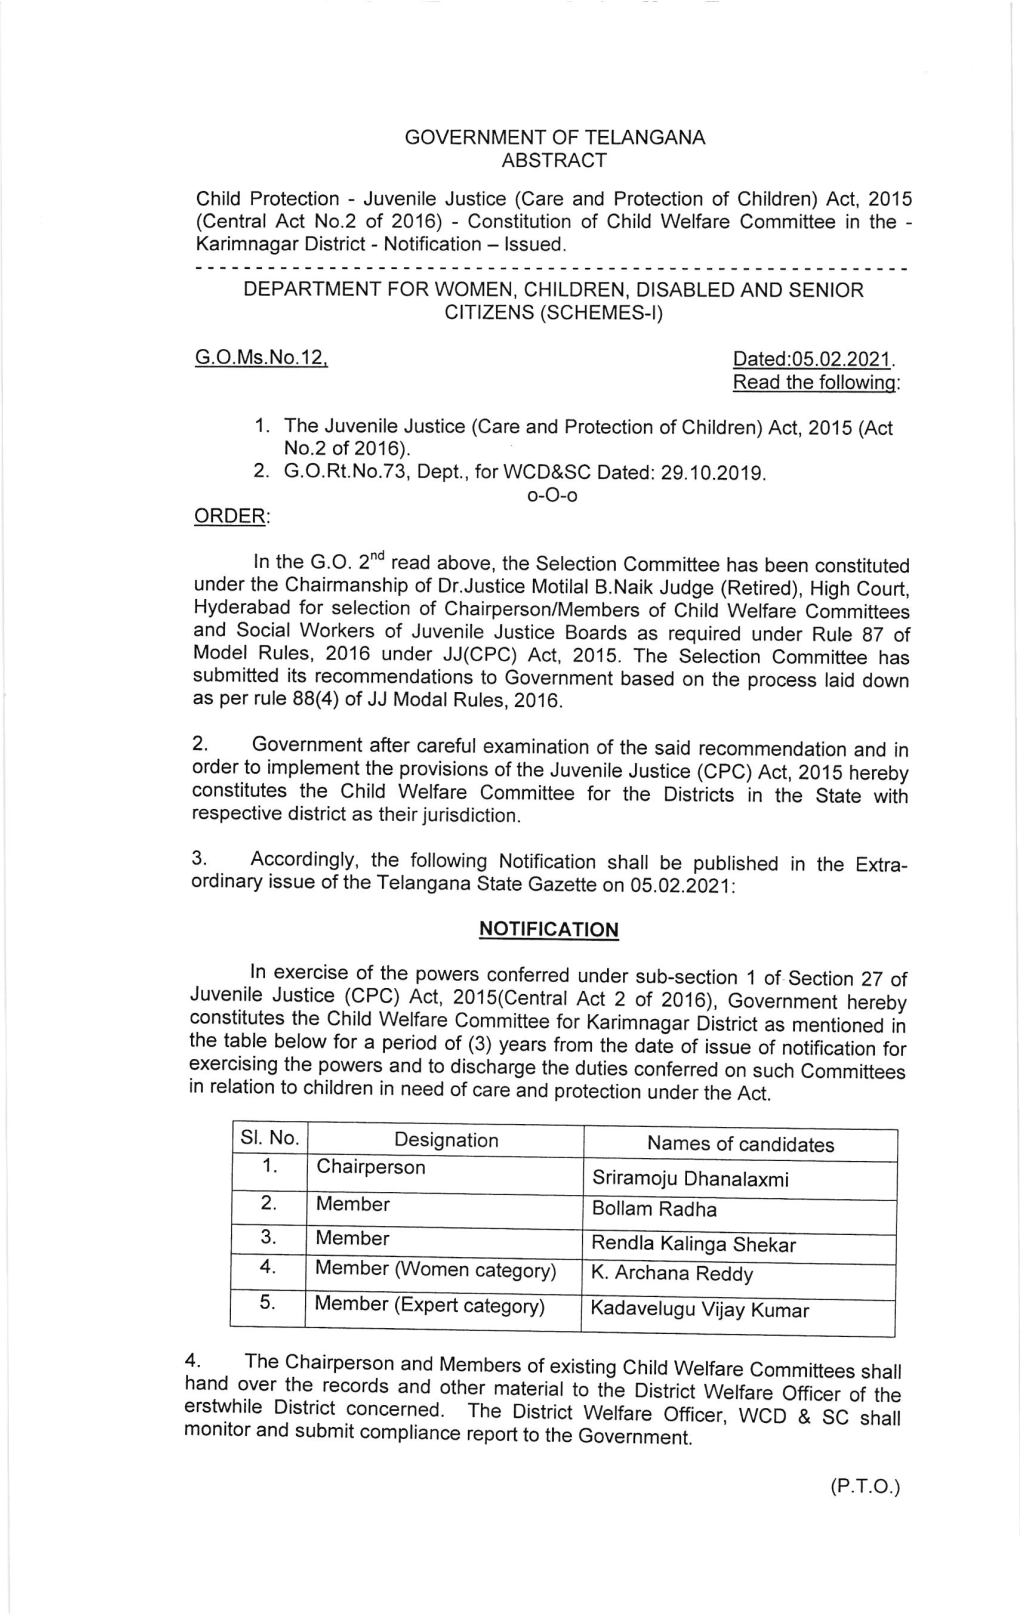 Constitutes the Child Welfare Committee for the Diskicts in the State with Respective District As Their Jurisdiction